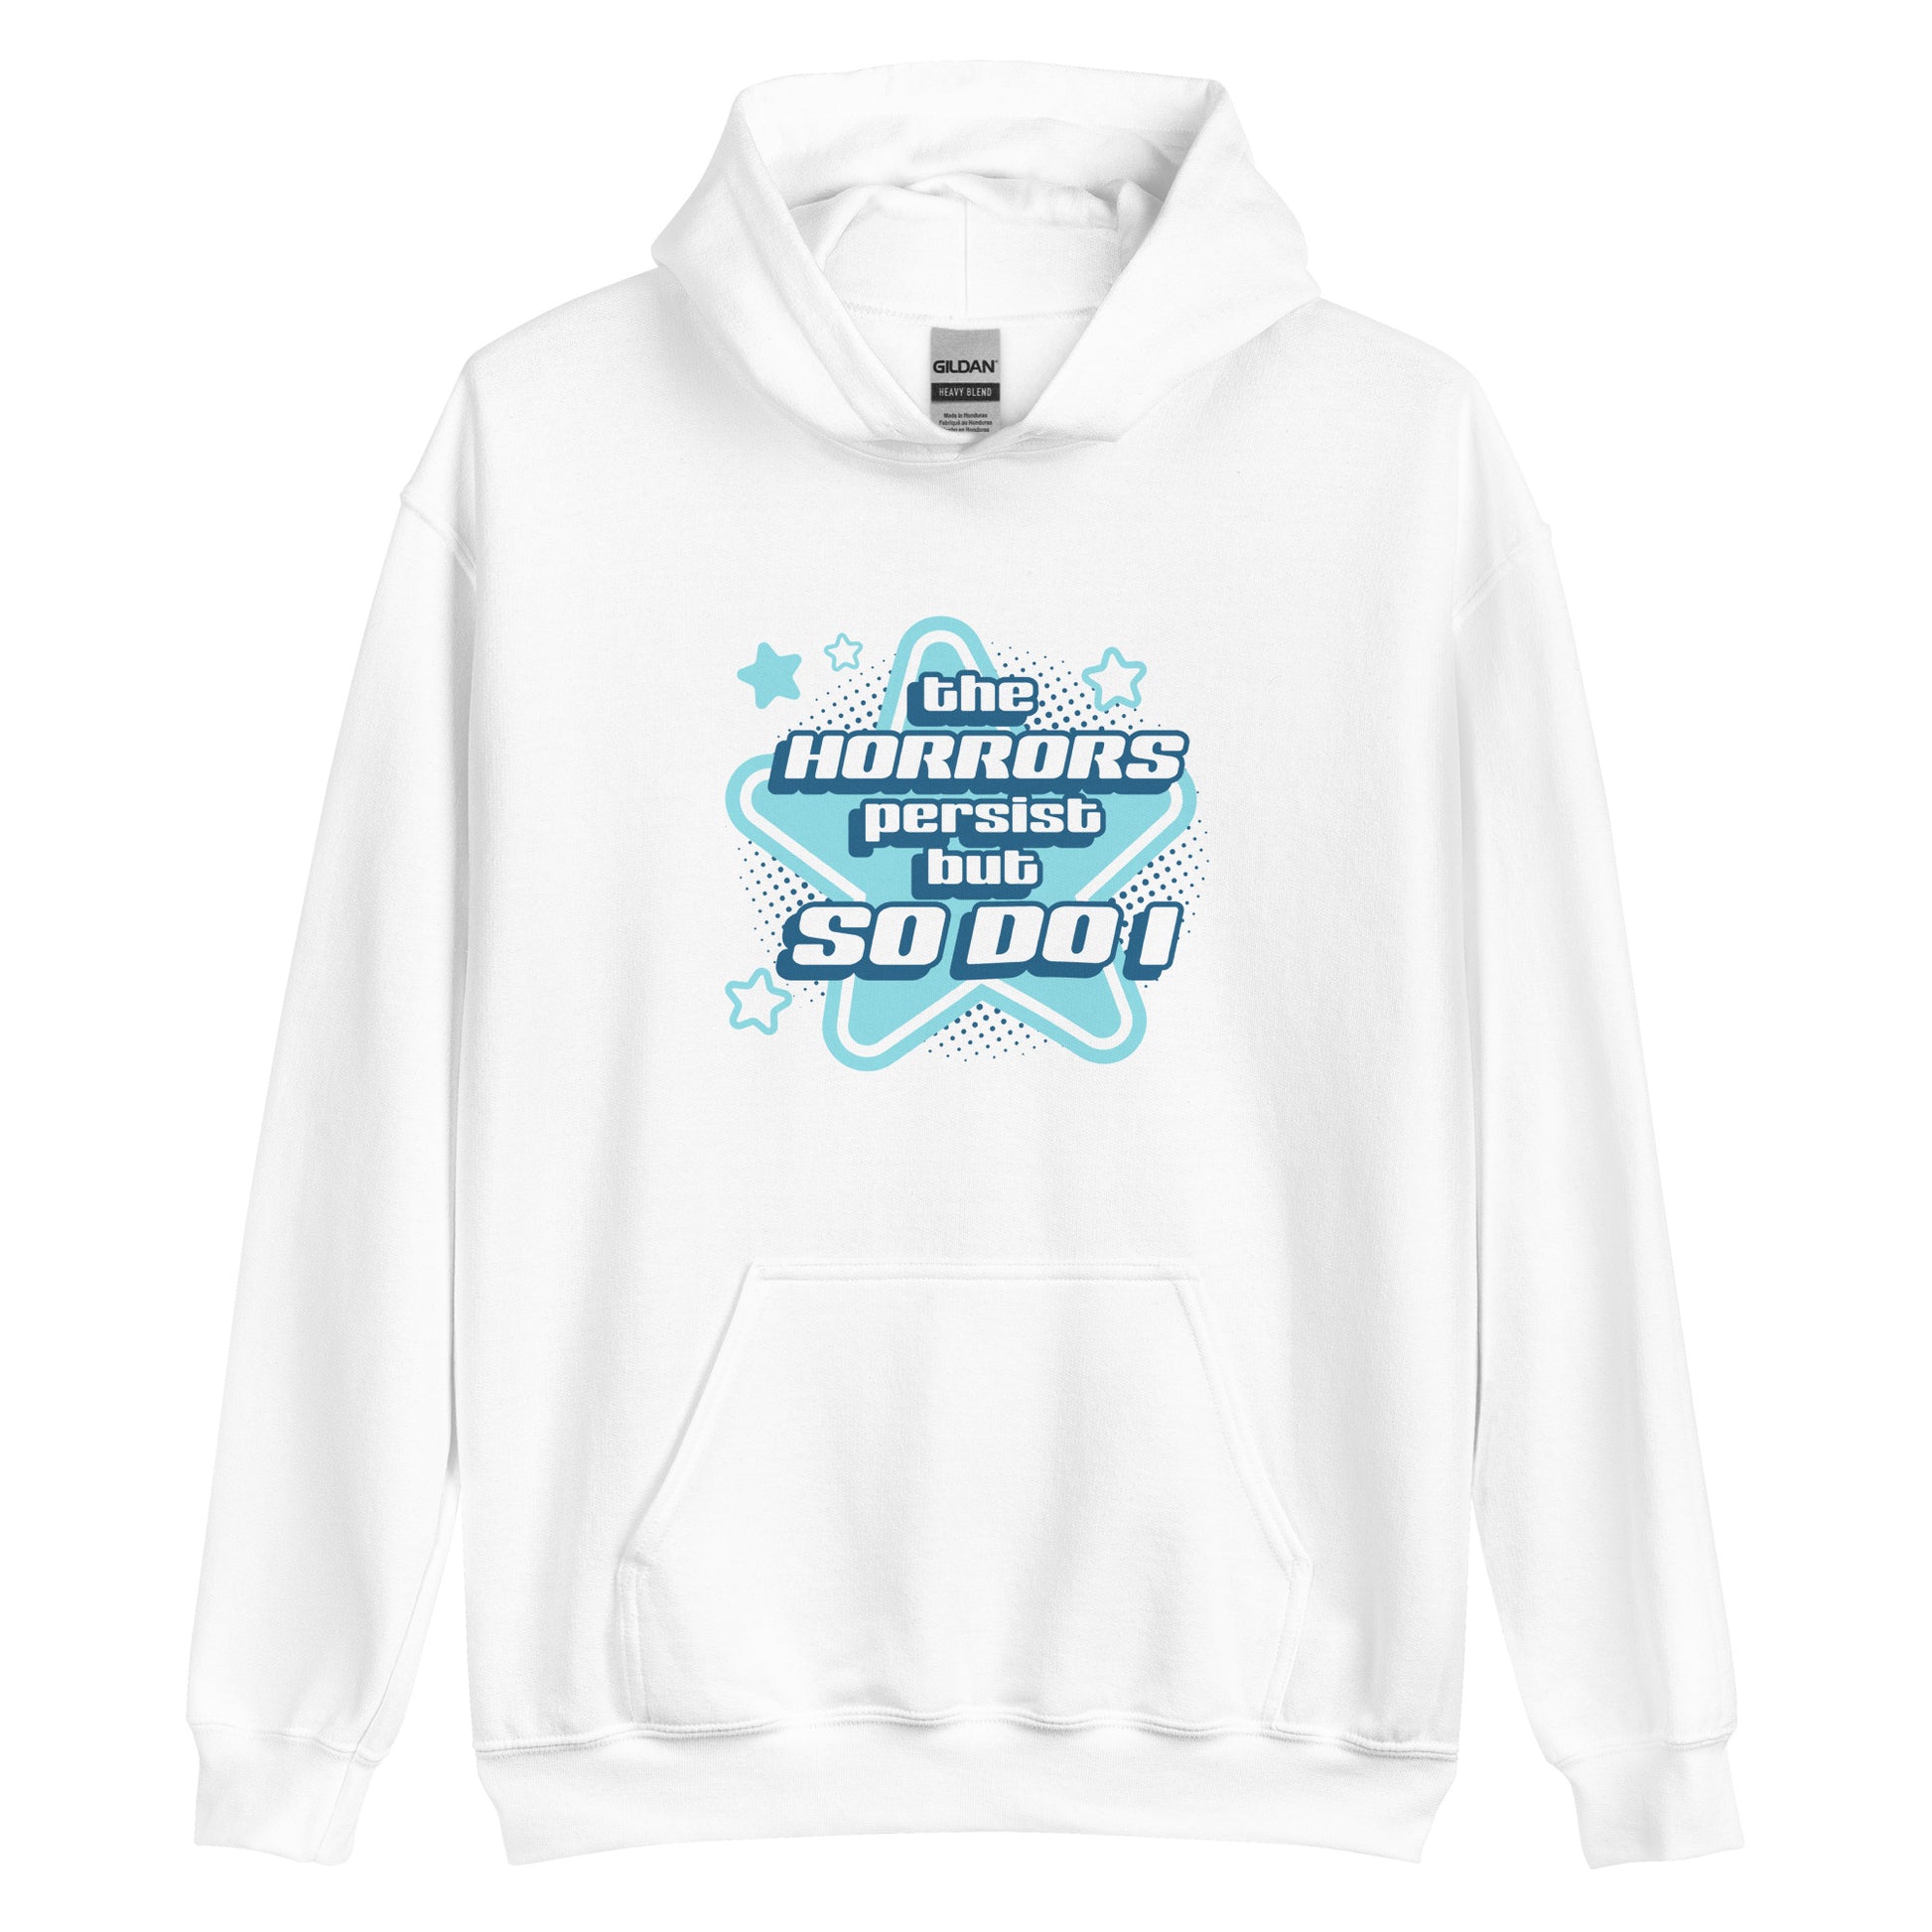 A white hooded sweatshirt featuring blue and white stars over a halftone pattern with chunky text that reads "the horrors persist but so do i".